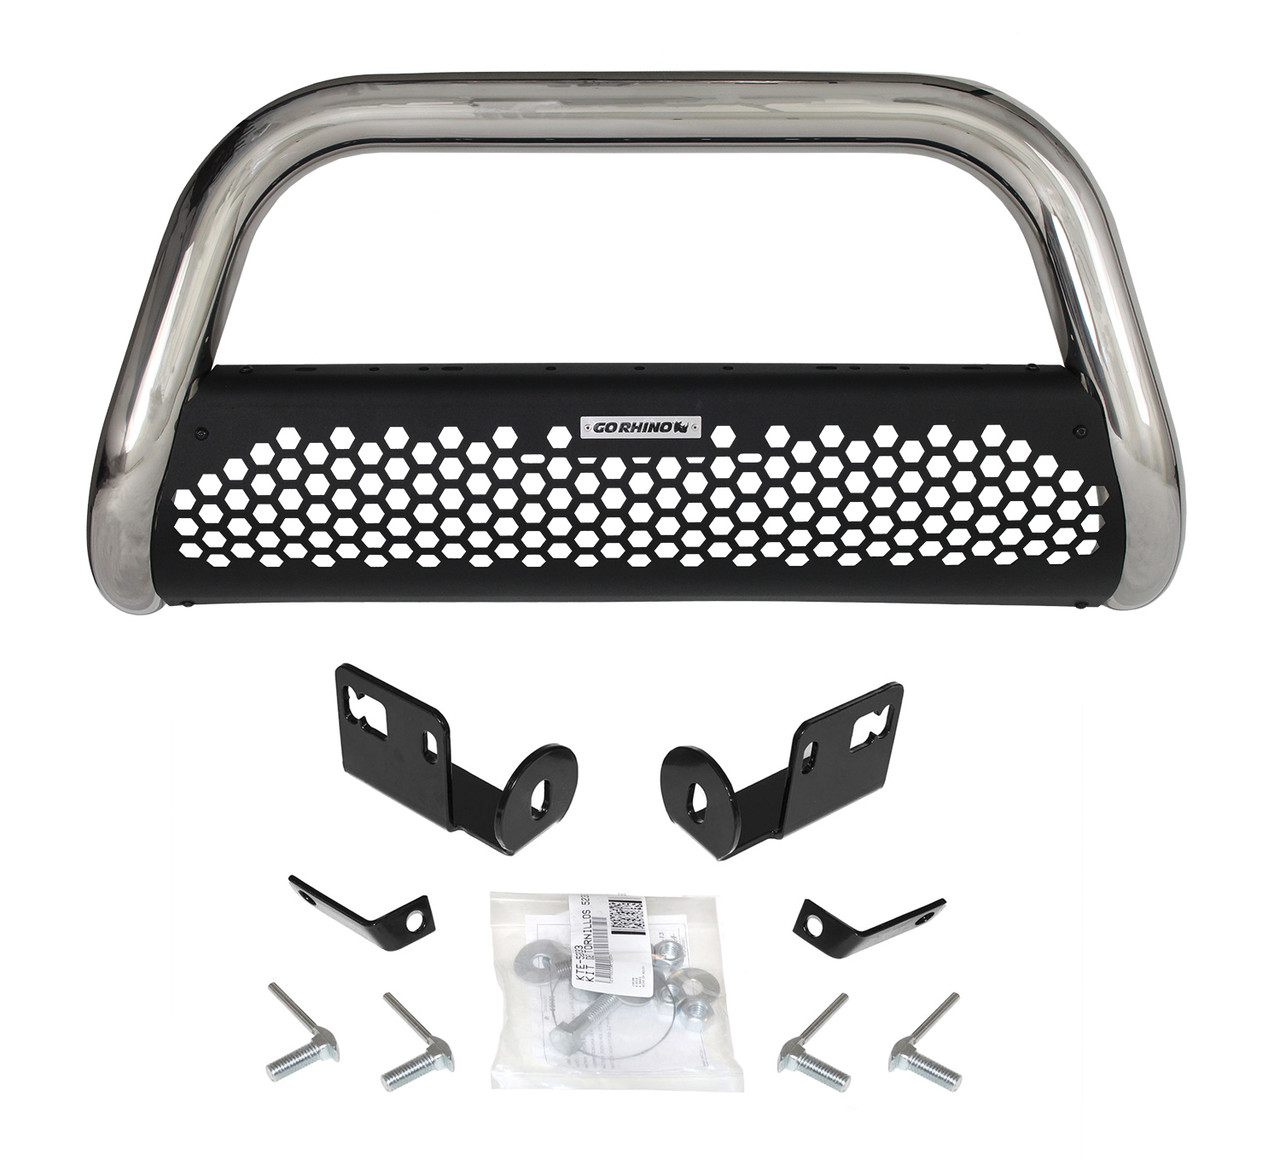 Go Rhino 55217PS Chevrolet Silverado, GMC Sierra 2500HD 3500HD 2007-2019 New RHINO Charger 2 RC2 - Complete kit: Bull Bar, Front Guard + Brackets, Polished Stainless Steel Installation Kit Included